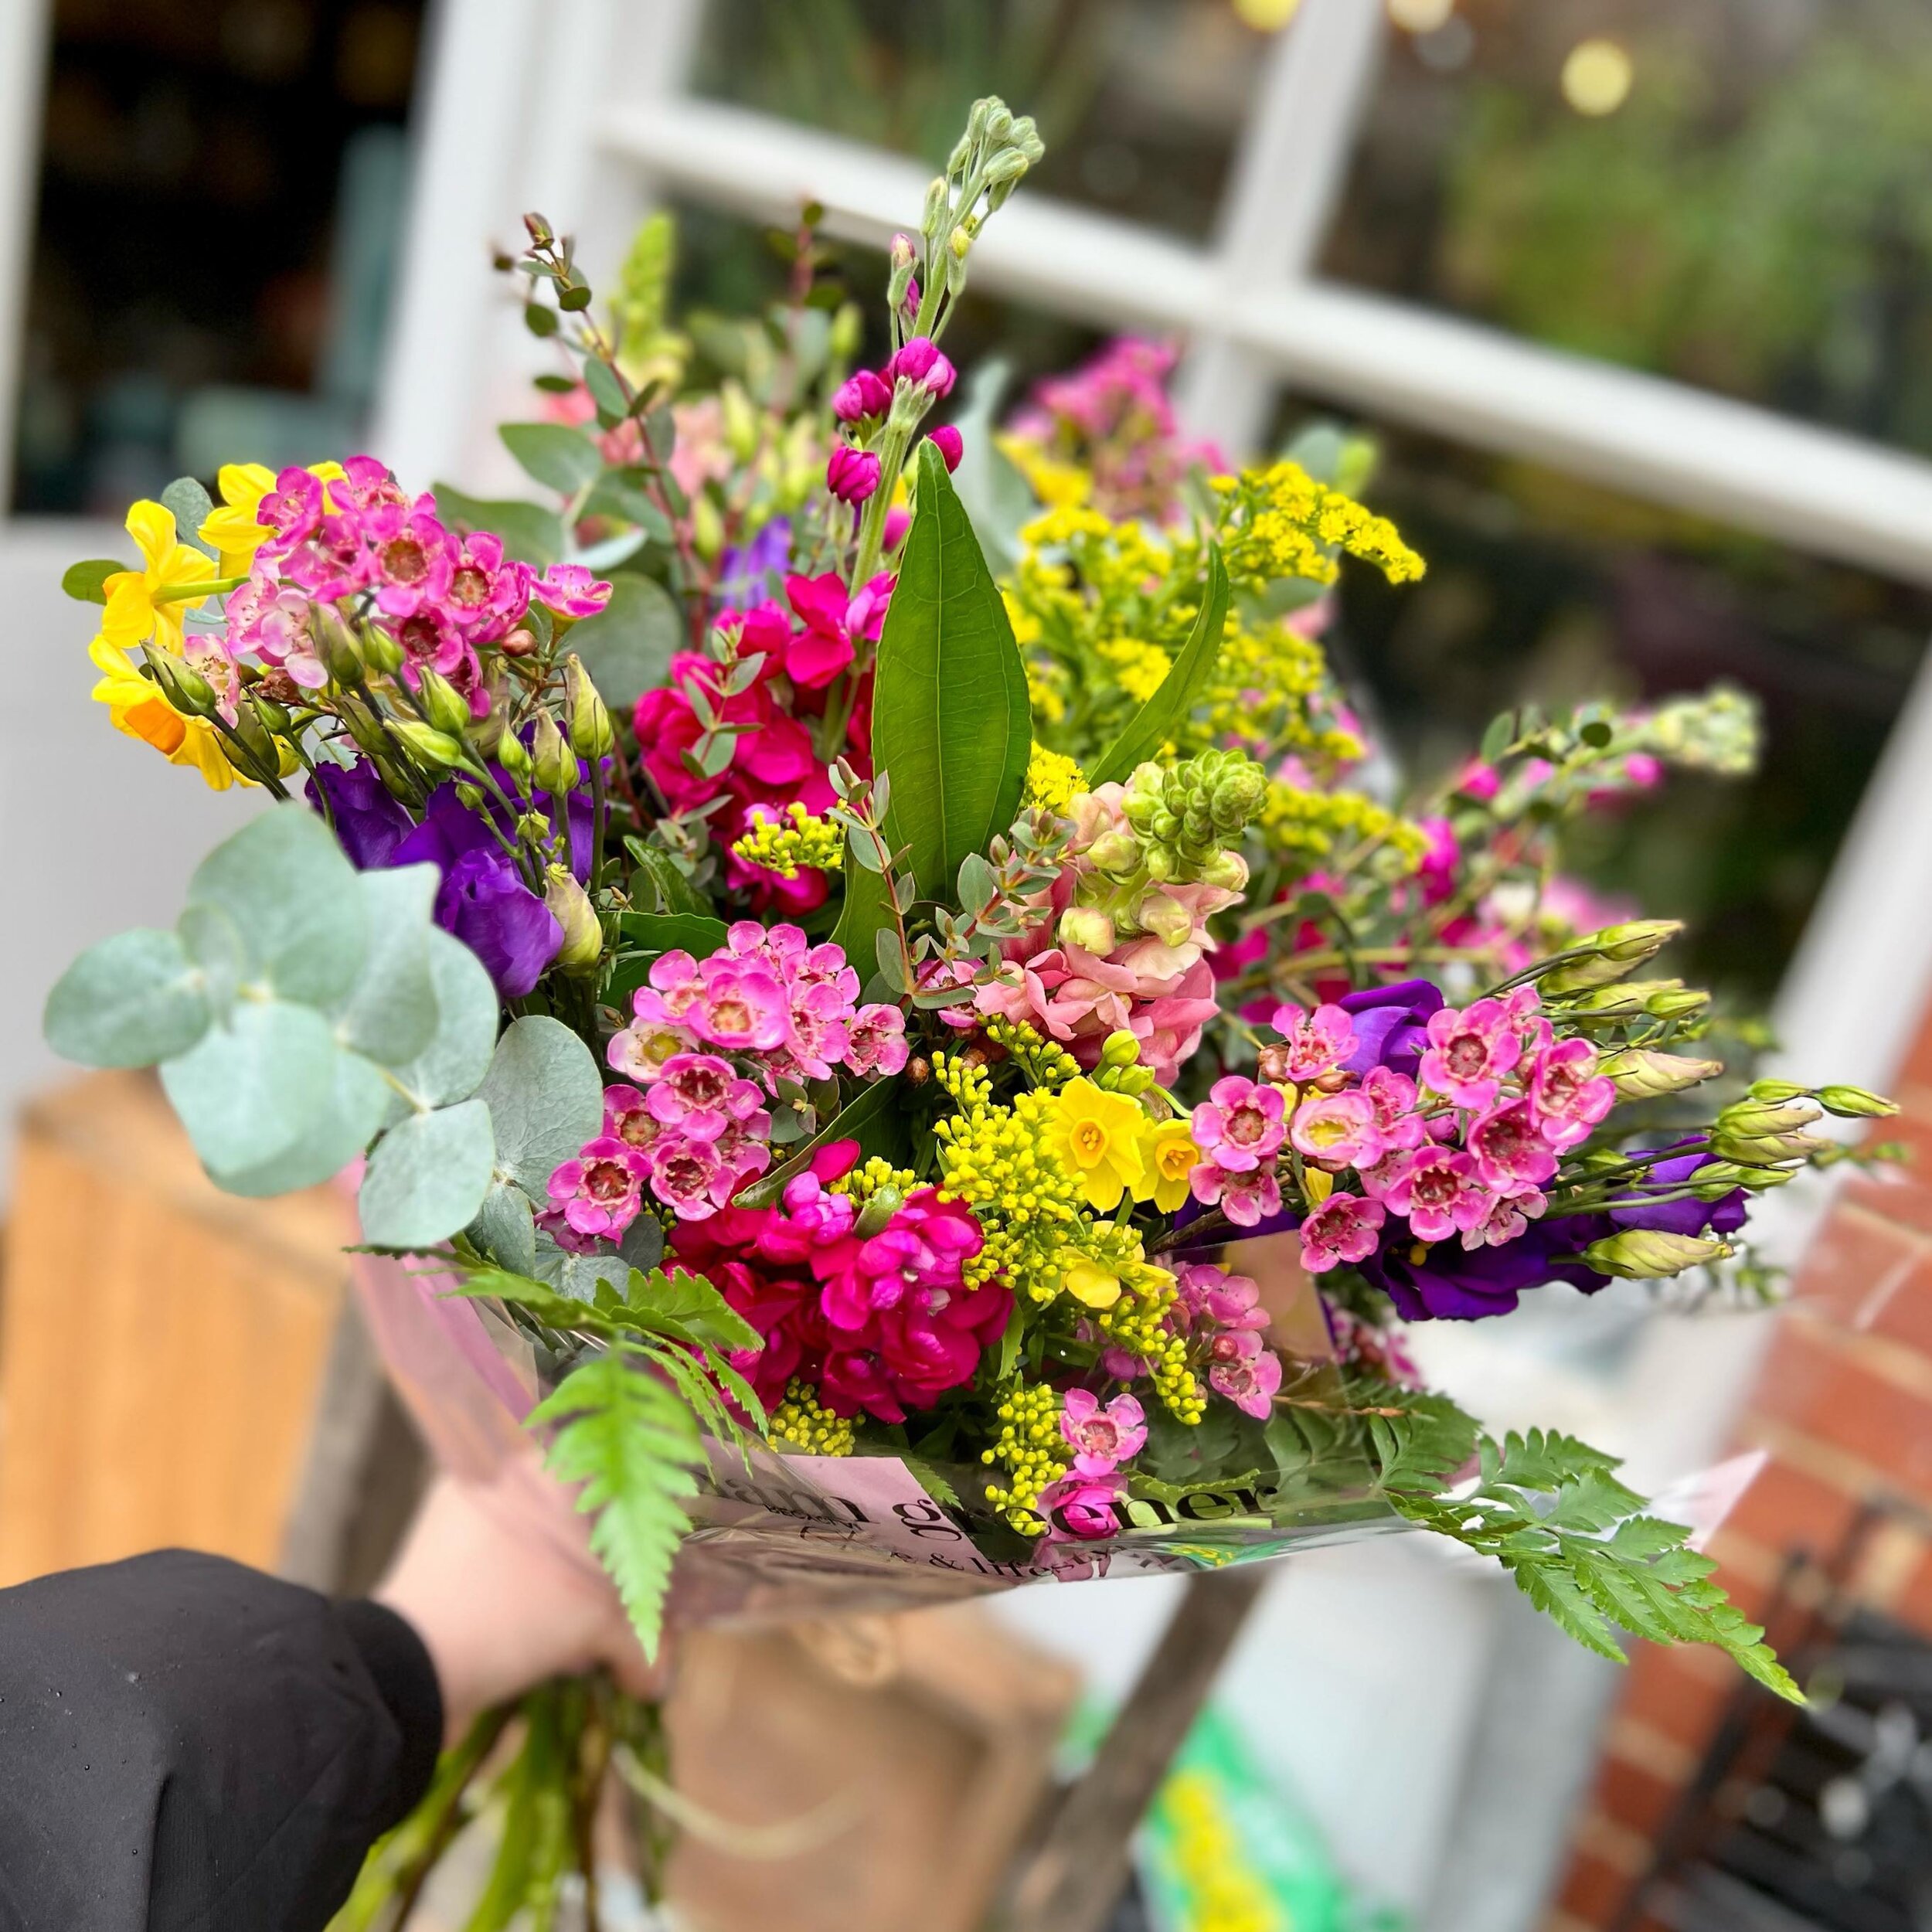 Mega summer vibes from this bright bunch 💜🧡 a great choice when deciding what to go for this Mother&rsquo;s Day!
#floristchoice #brightbouquet #floristy